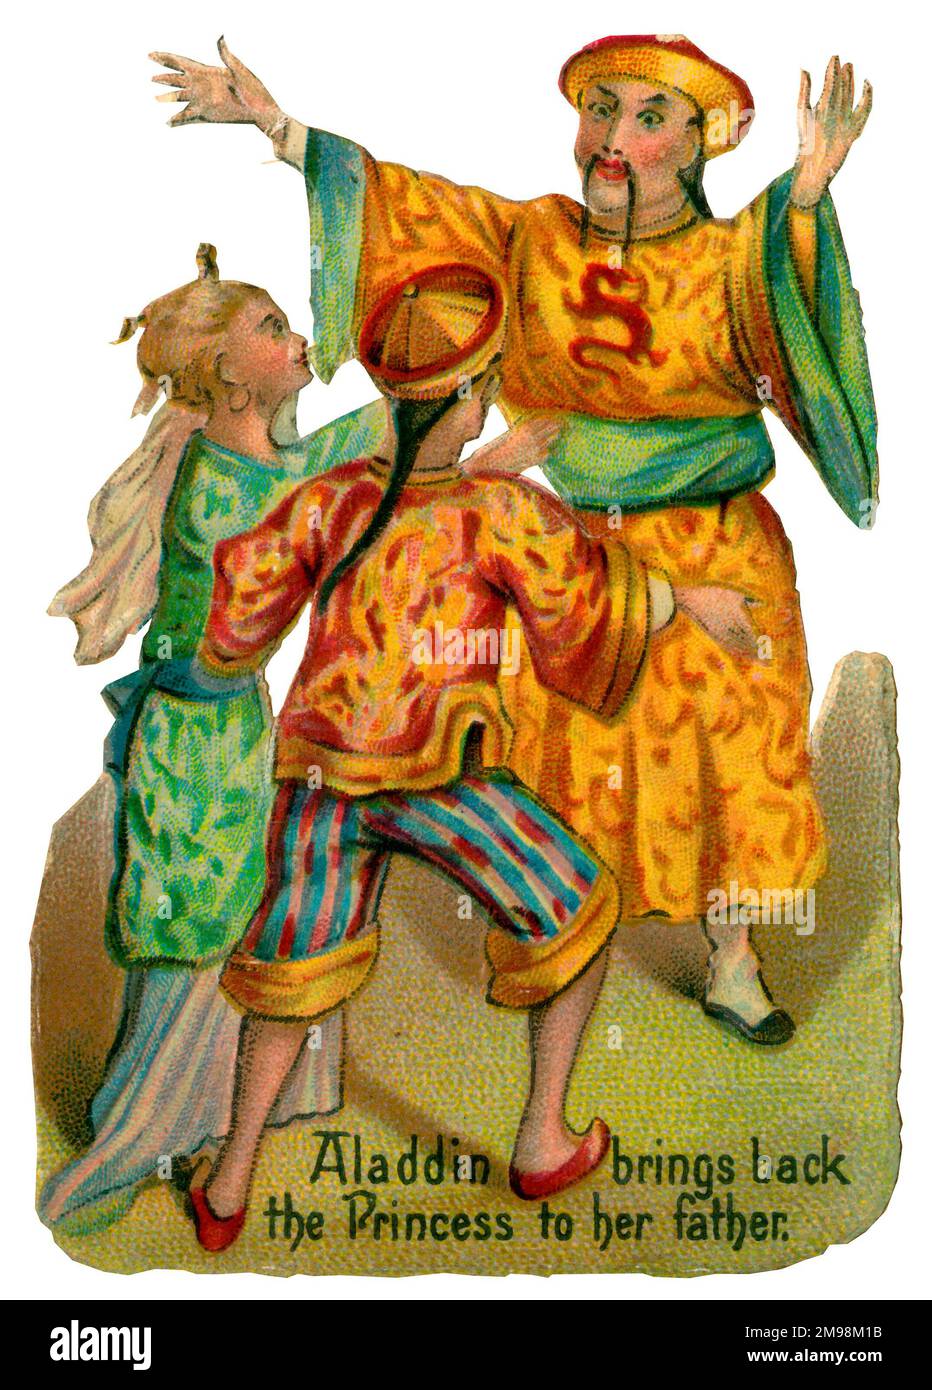 Victorian Scrap - Aladdin brings back the Princess to her father. Stock Photo